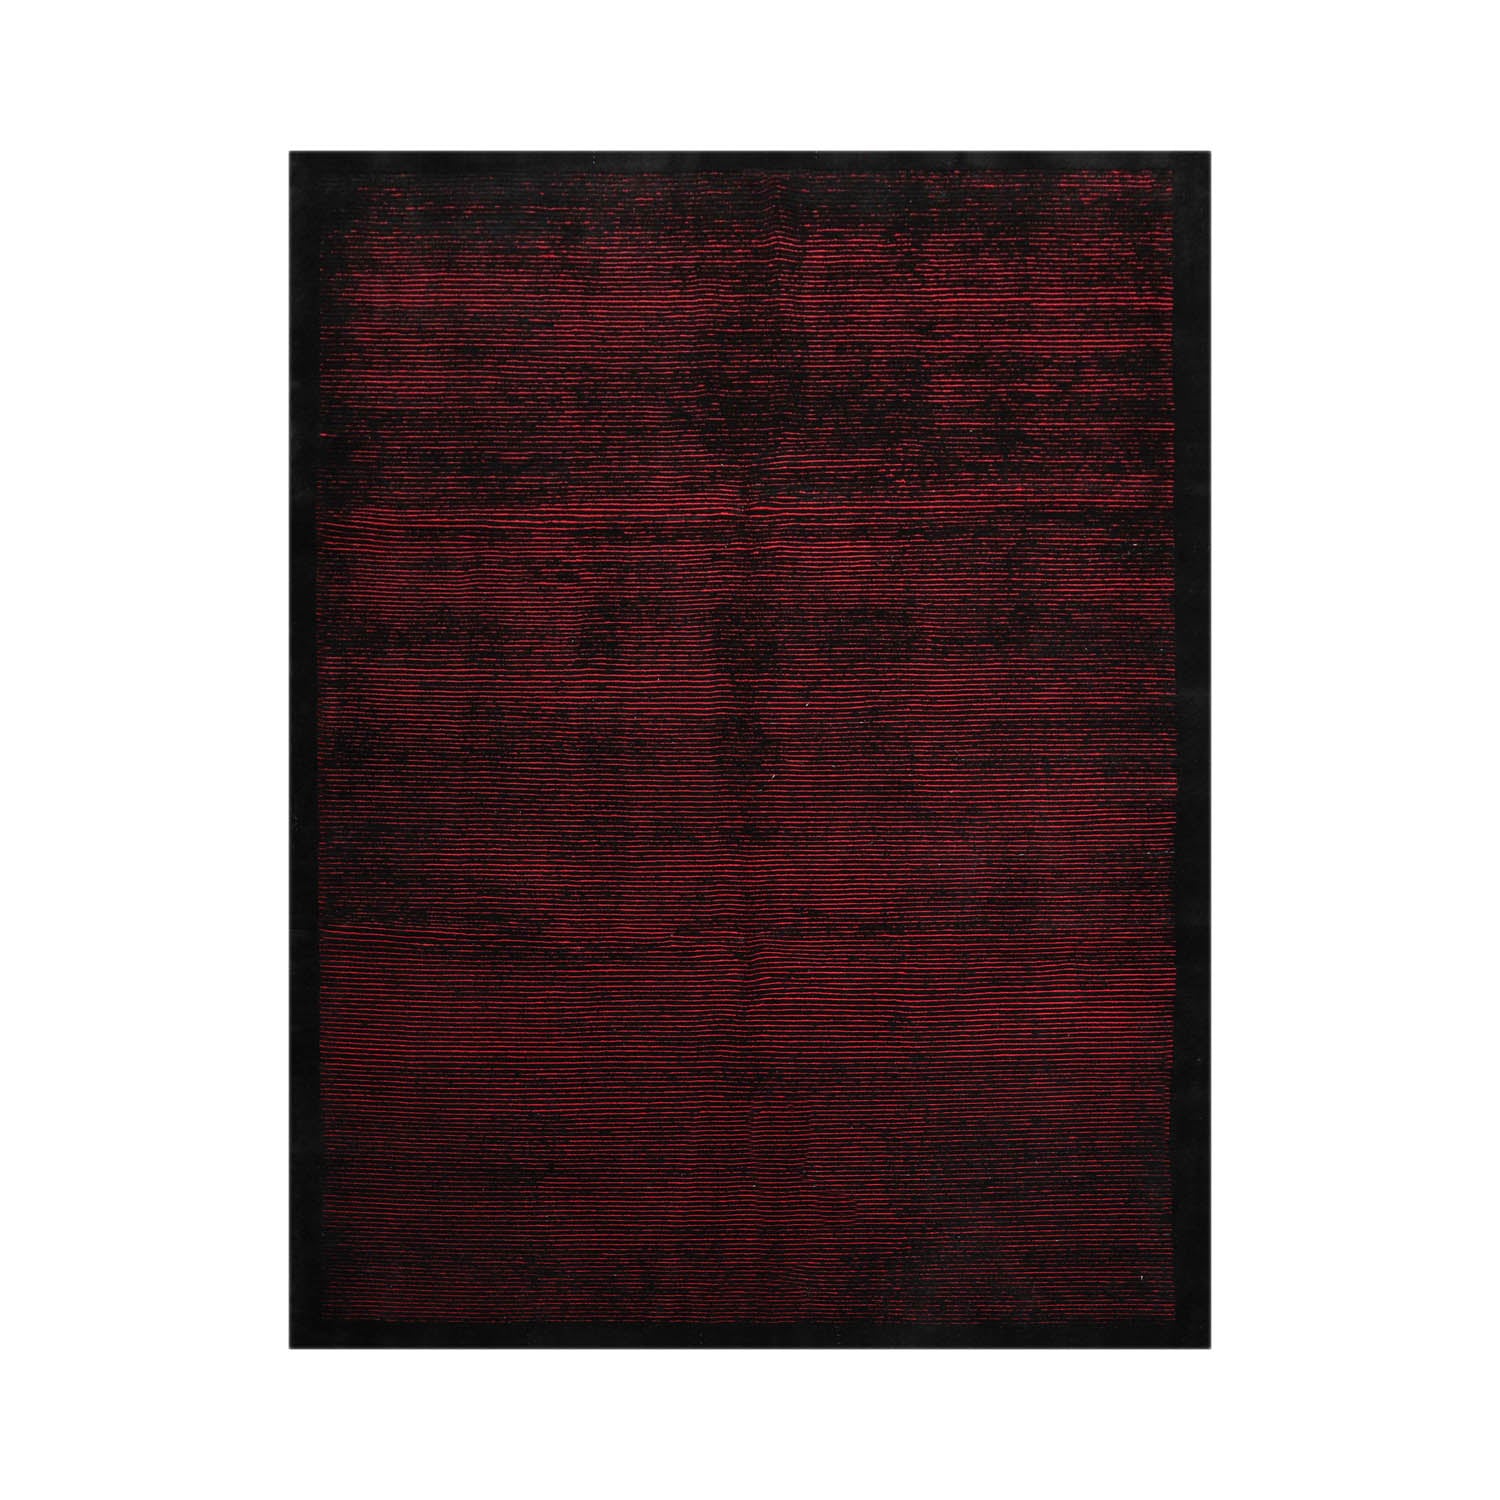 Depuy 6x9 Hand Knotted Tibetan 100% Wool Tibetan Traditional Oriental Area Rug Black, Red Color